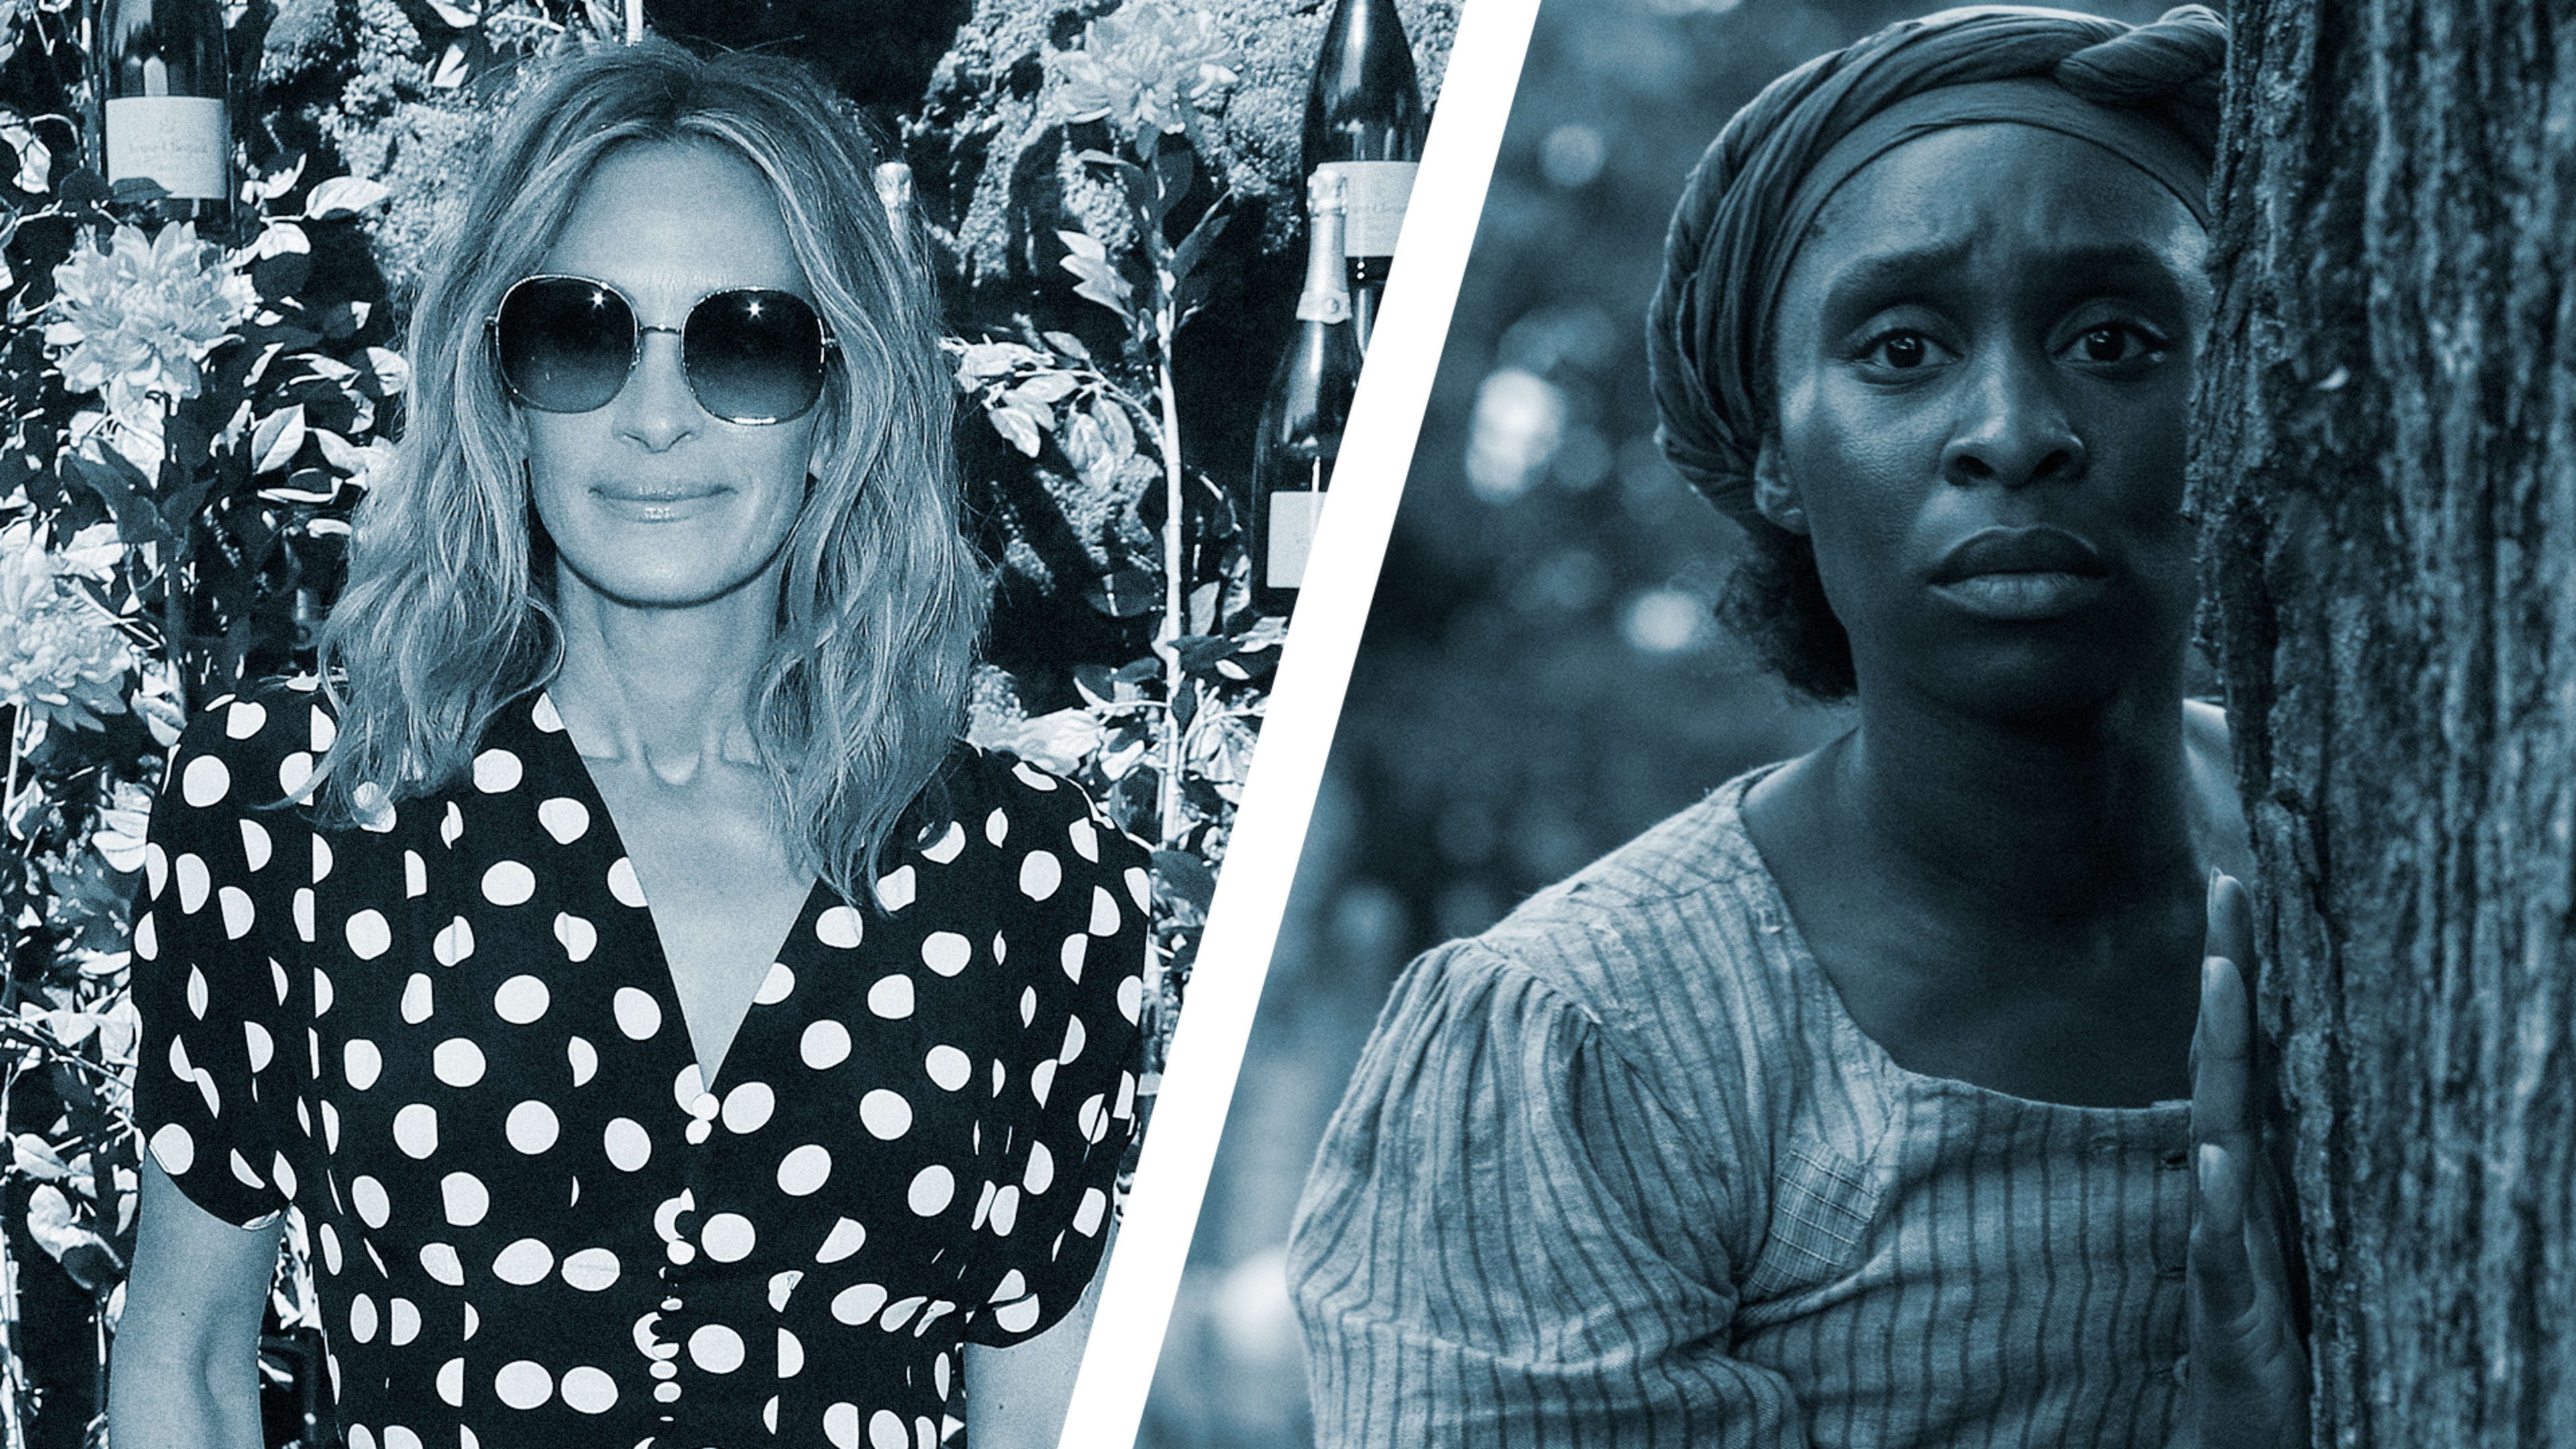 A studio exec wanted Julia Roberts to play Harriet Tubman. Naturally, Twitter reacted